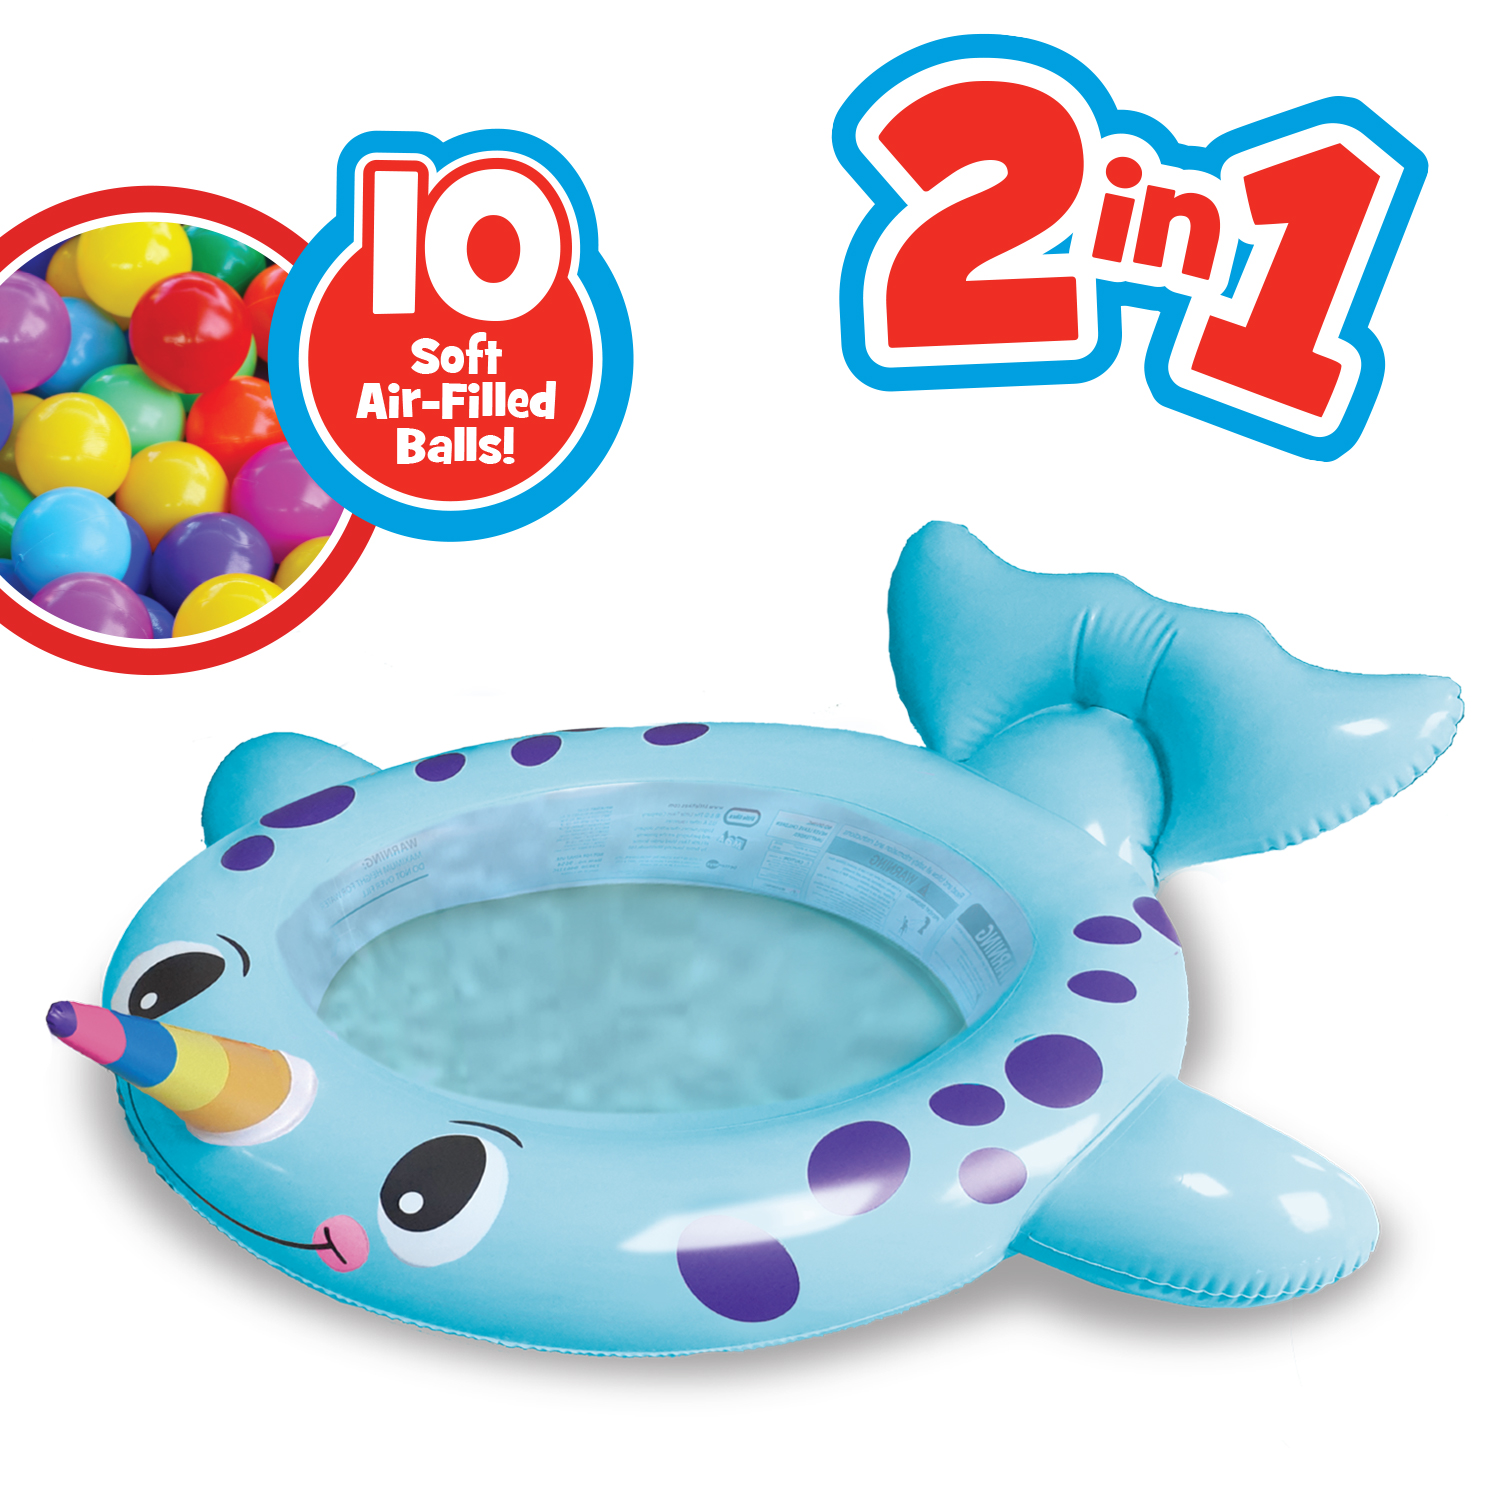 Little Tikes Narwhal 2 in1 Play Center, Ball Pit Round Splash Area, Kids 2-6 Years Old - image 3 of 5